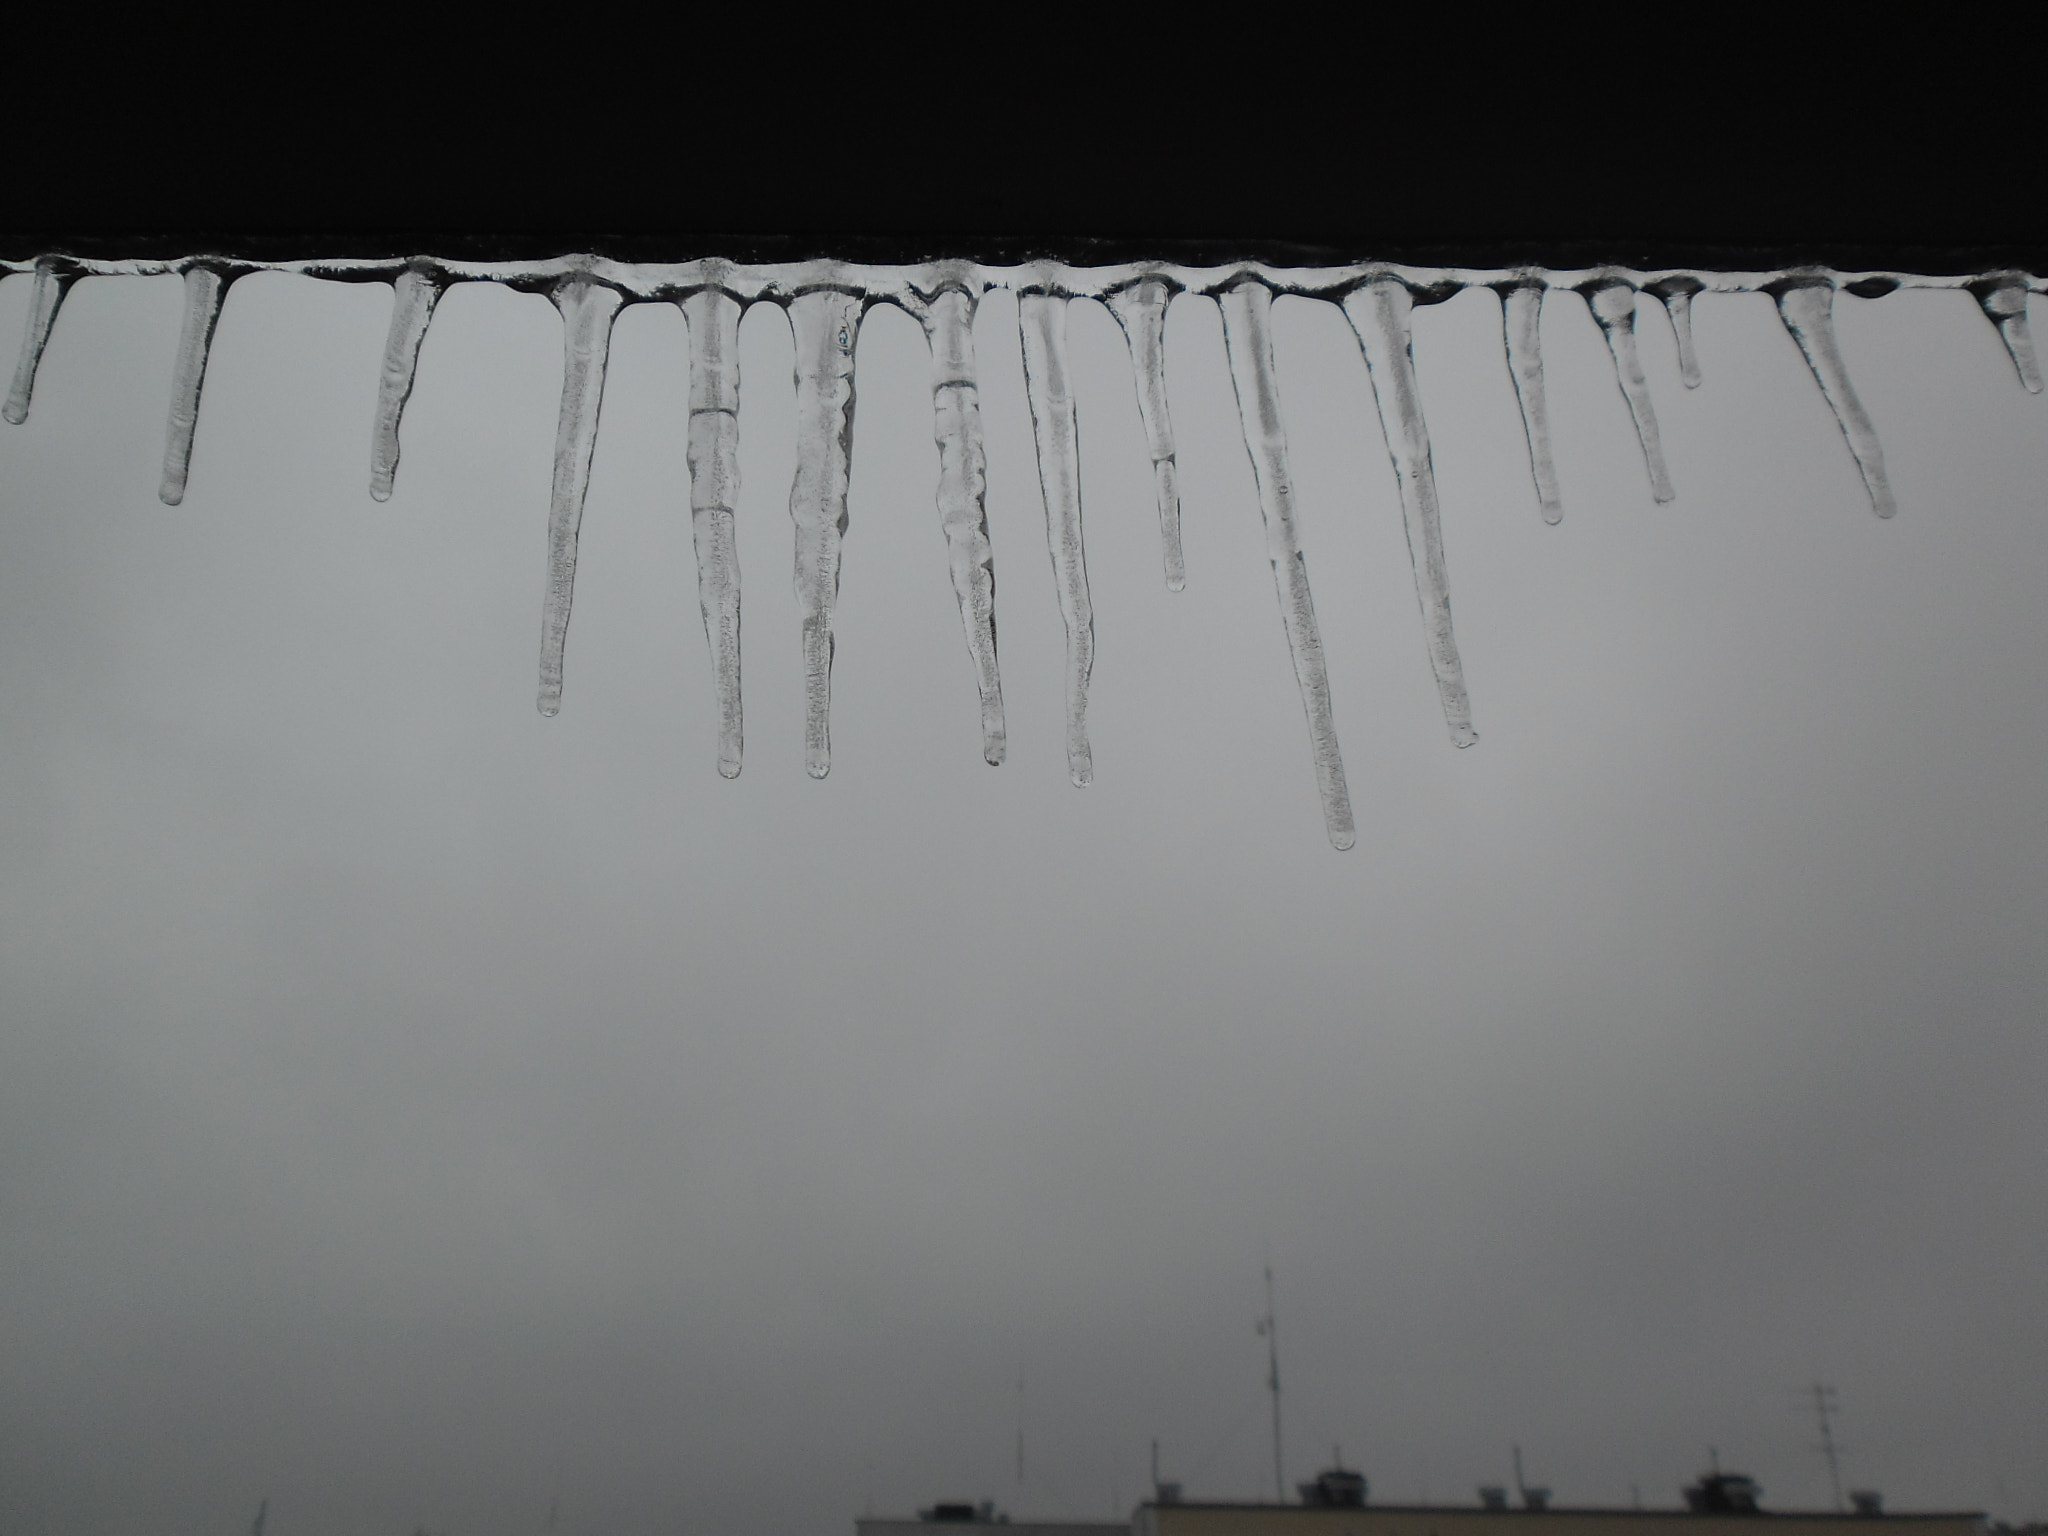 Samsung ES9/ ES8 sample photo. A herd of icicles photography